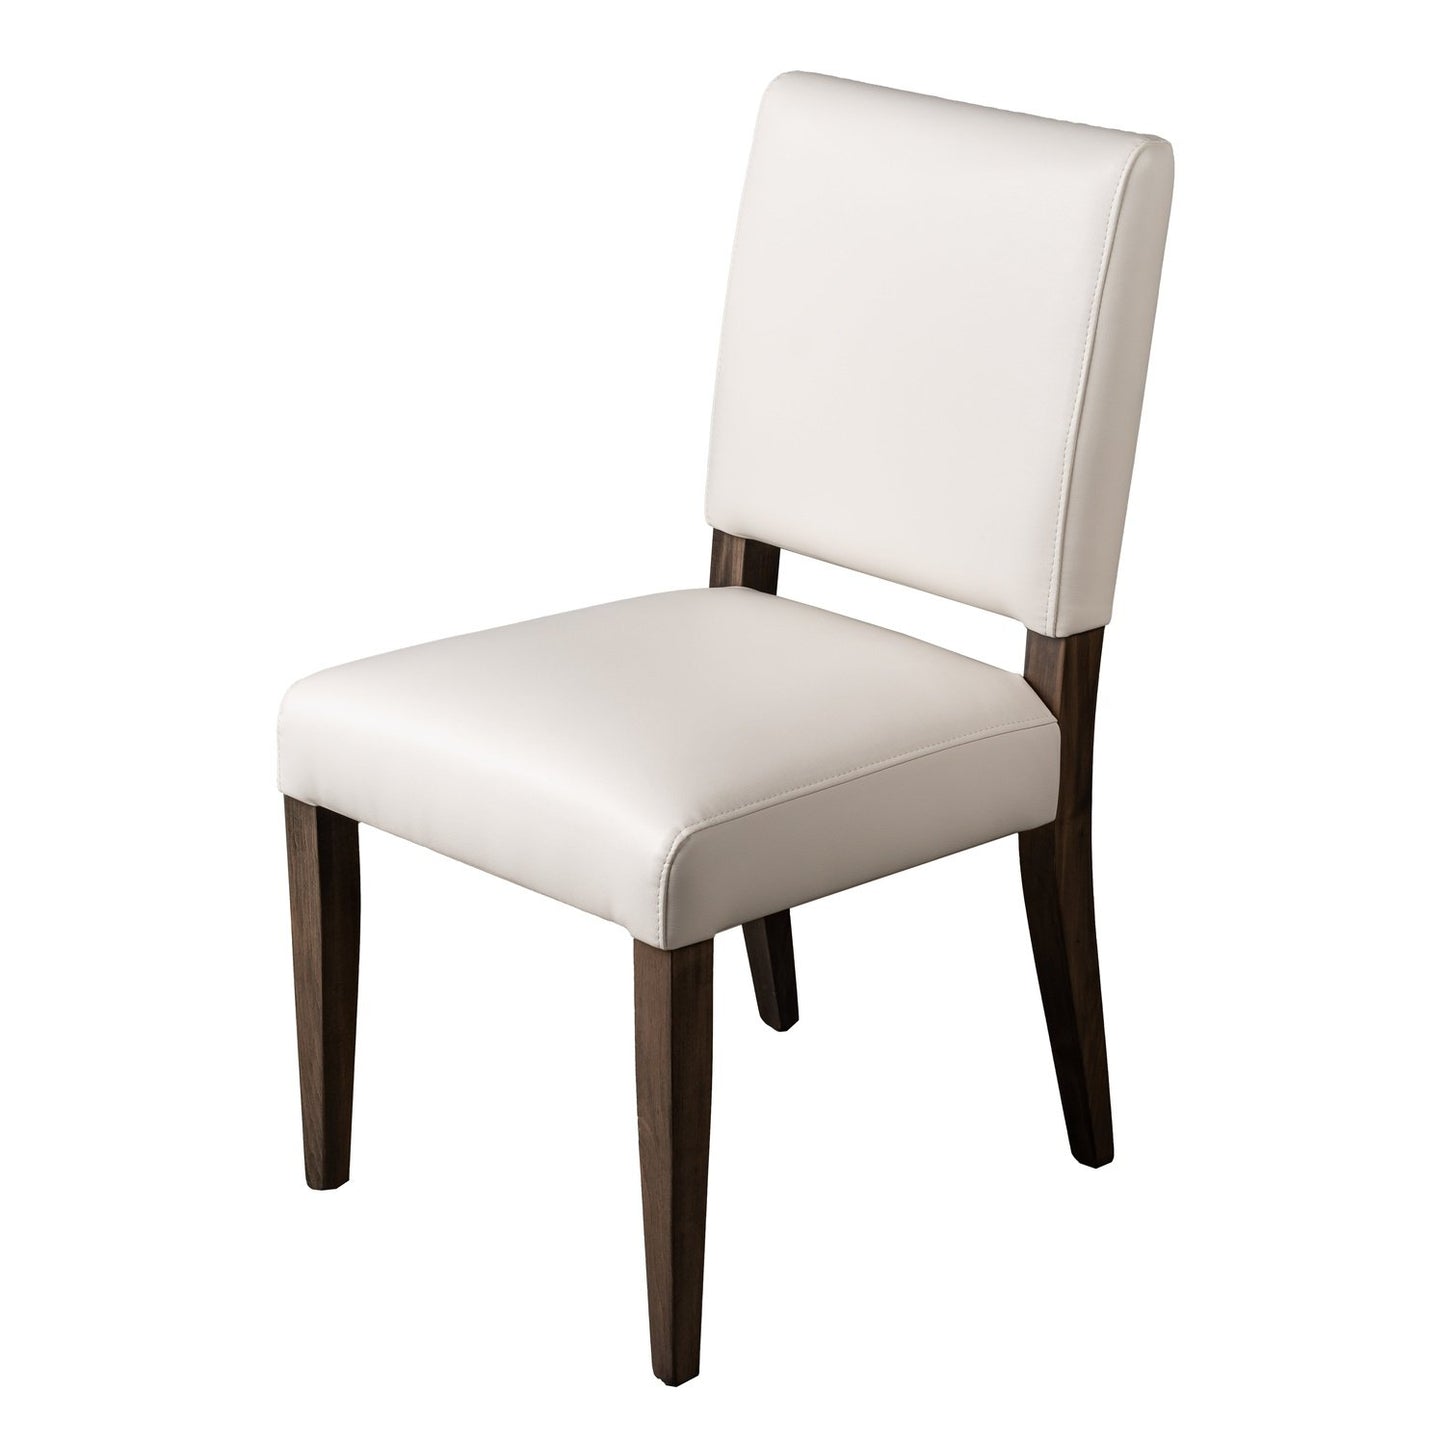 Salwick Chair (with or without studs)